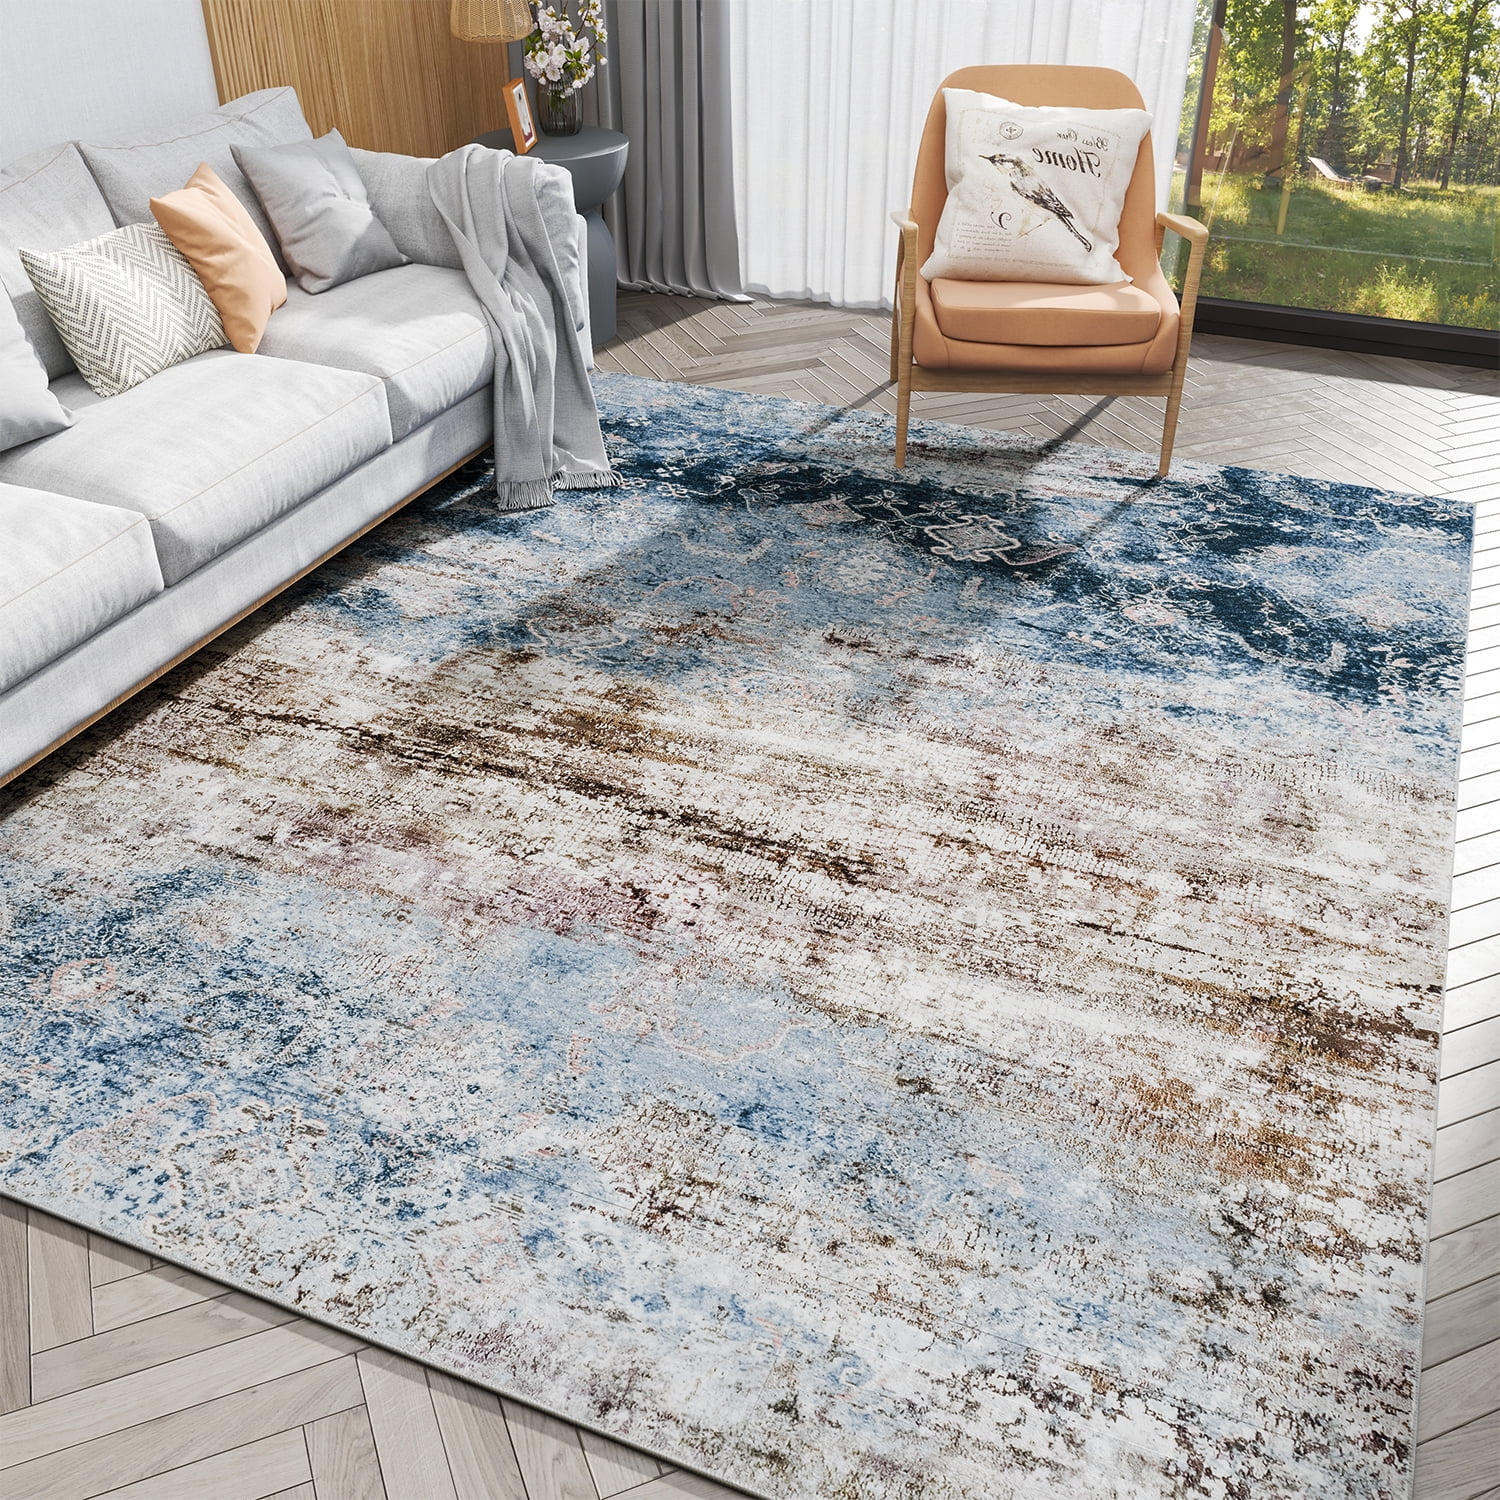 ILANGO Non Slip Area Rugs 5'x7' for Living Room Distressed Traditional  Kitchen Rugs Washable, Carpet Runner Floor Mat for Indoor Entryway Bedroom